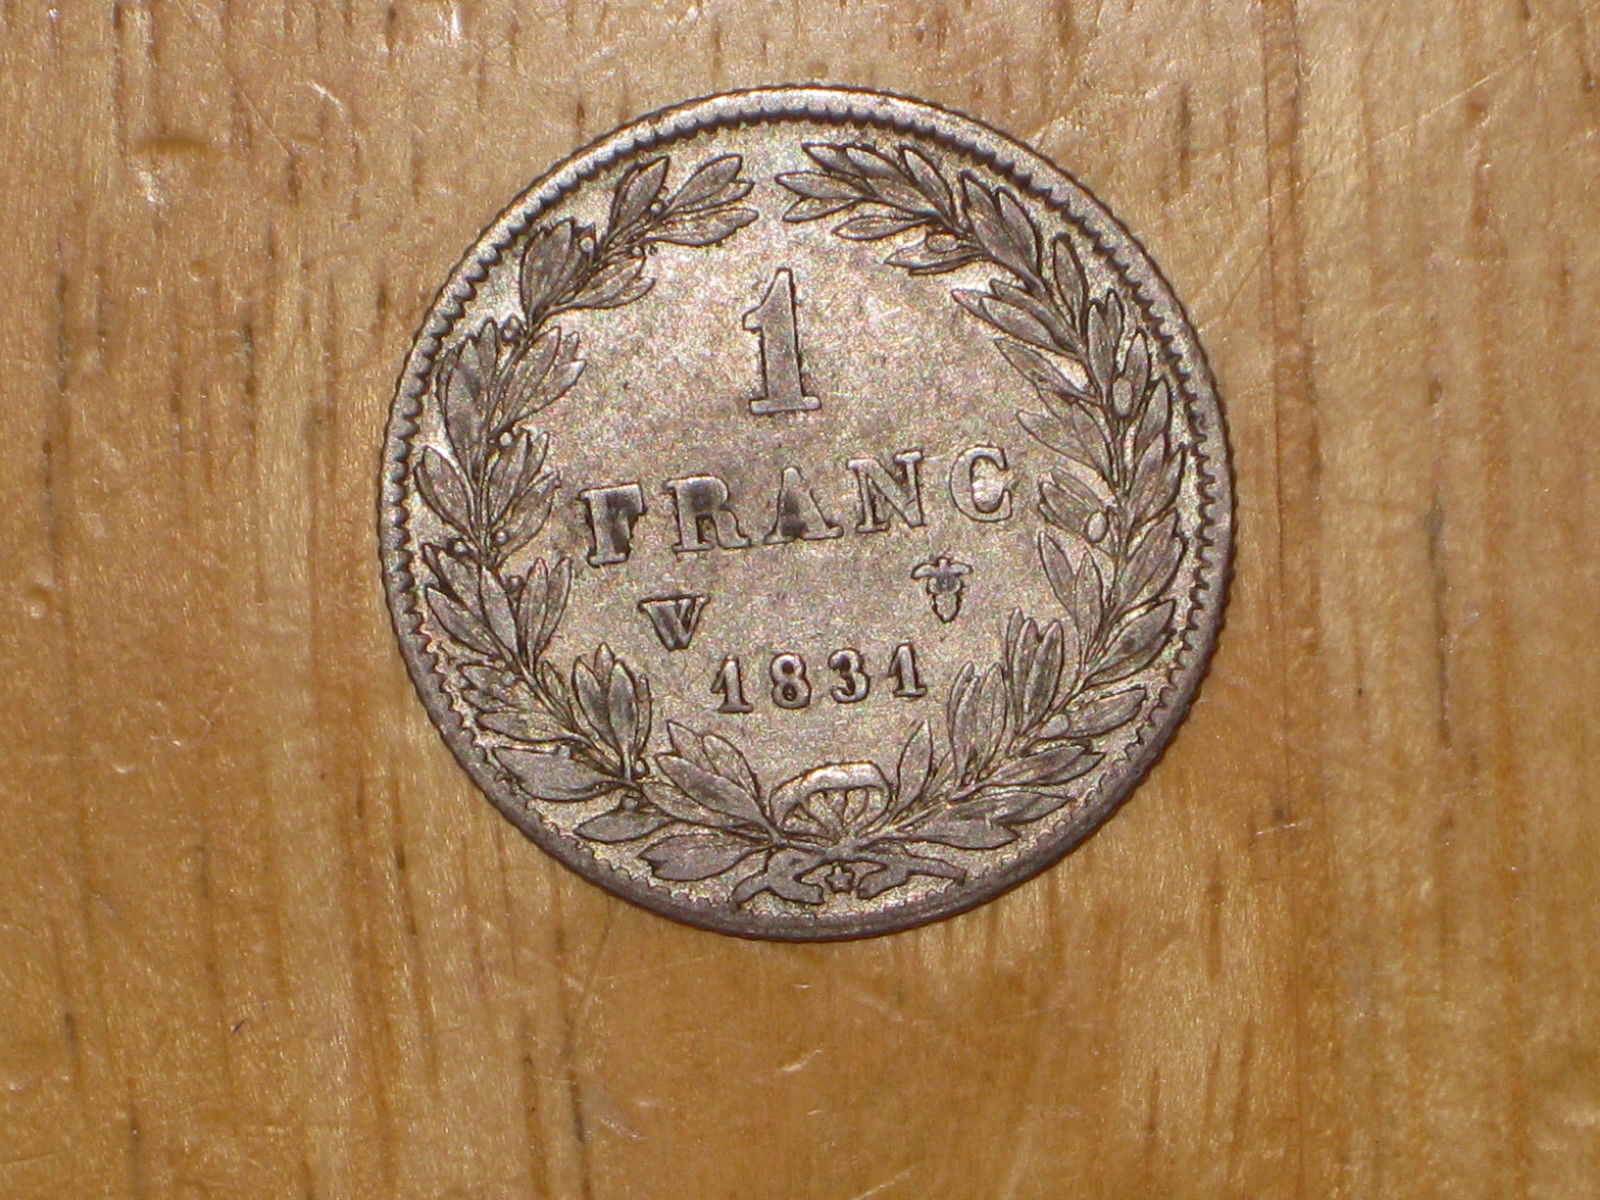 France 1831 W silver Franc coin Very Fine nice KEY DATE